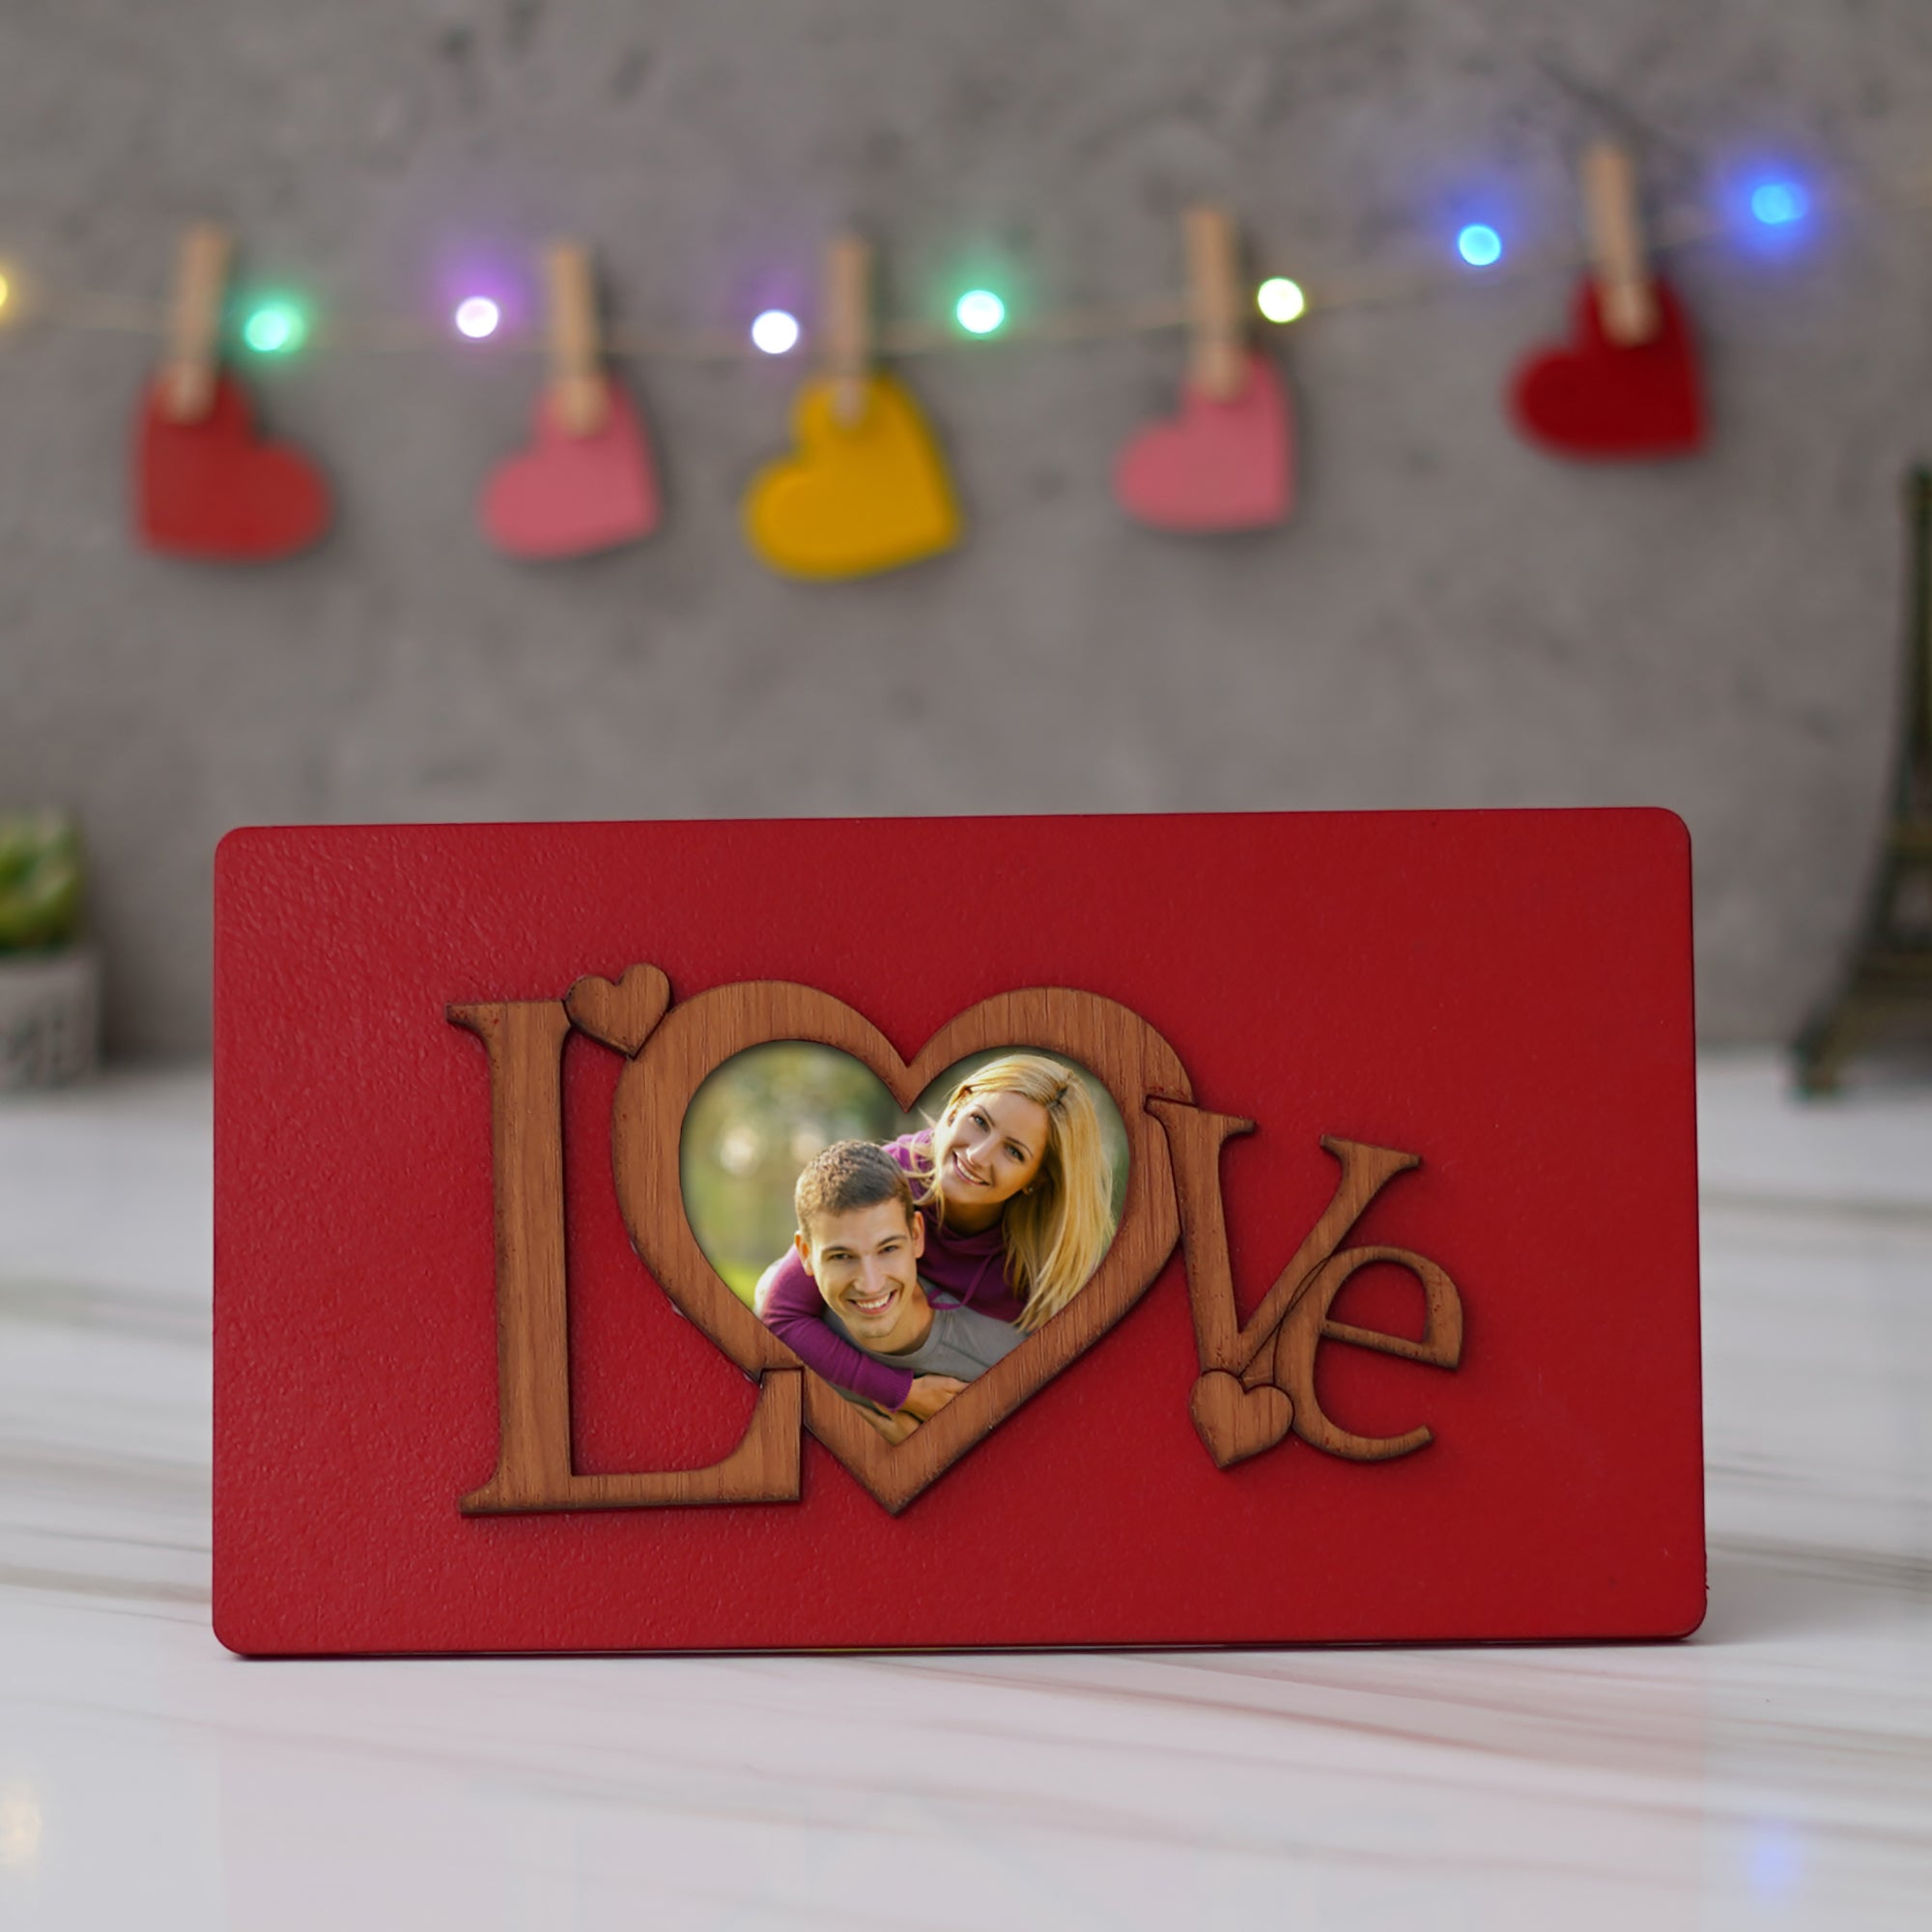 Valentine Combo of Golden Rose Gift Set, "Love" Wooden Photo Frame With Red Stand, Bride Kissing Groom Romantic Polyresin Decorative Showpiece 3